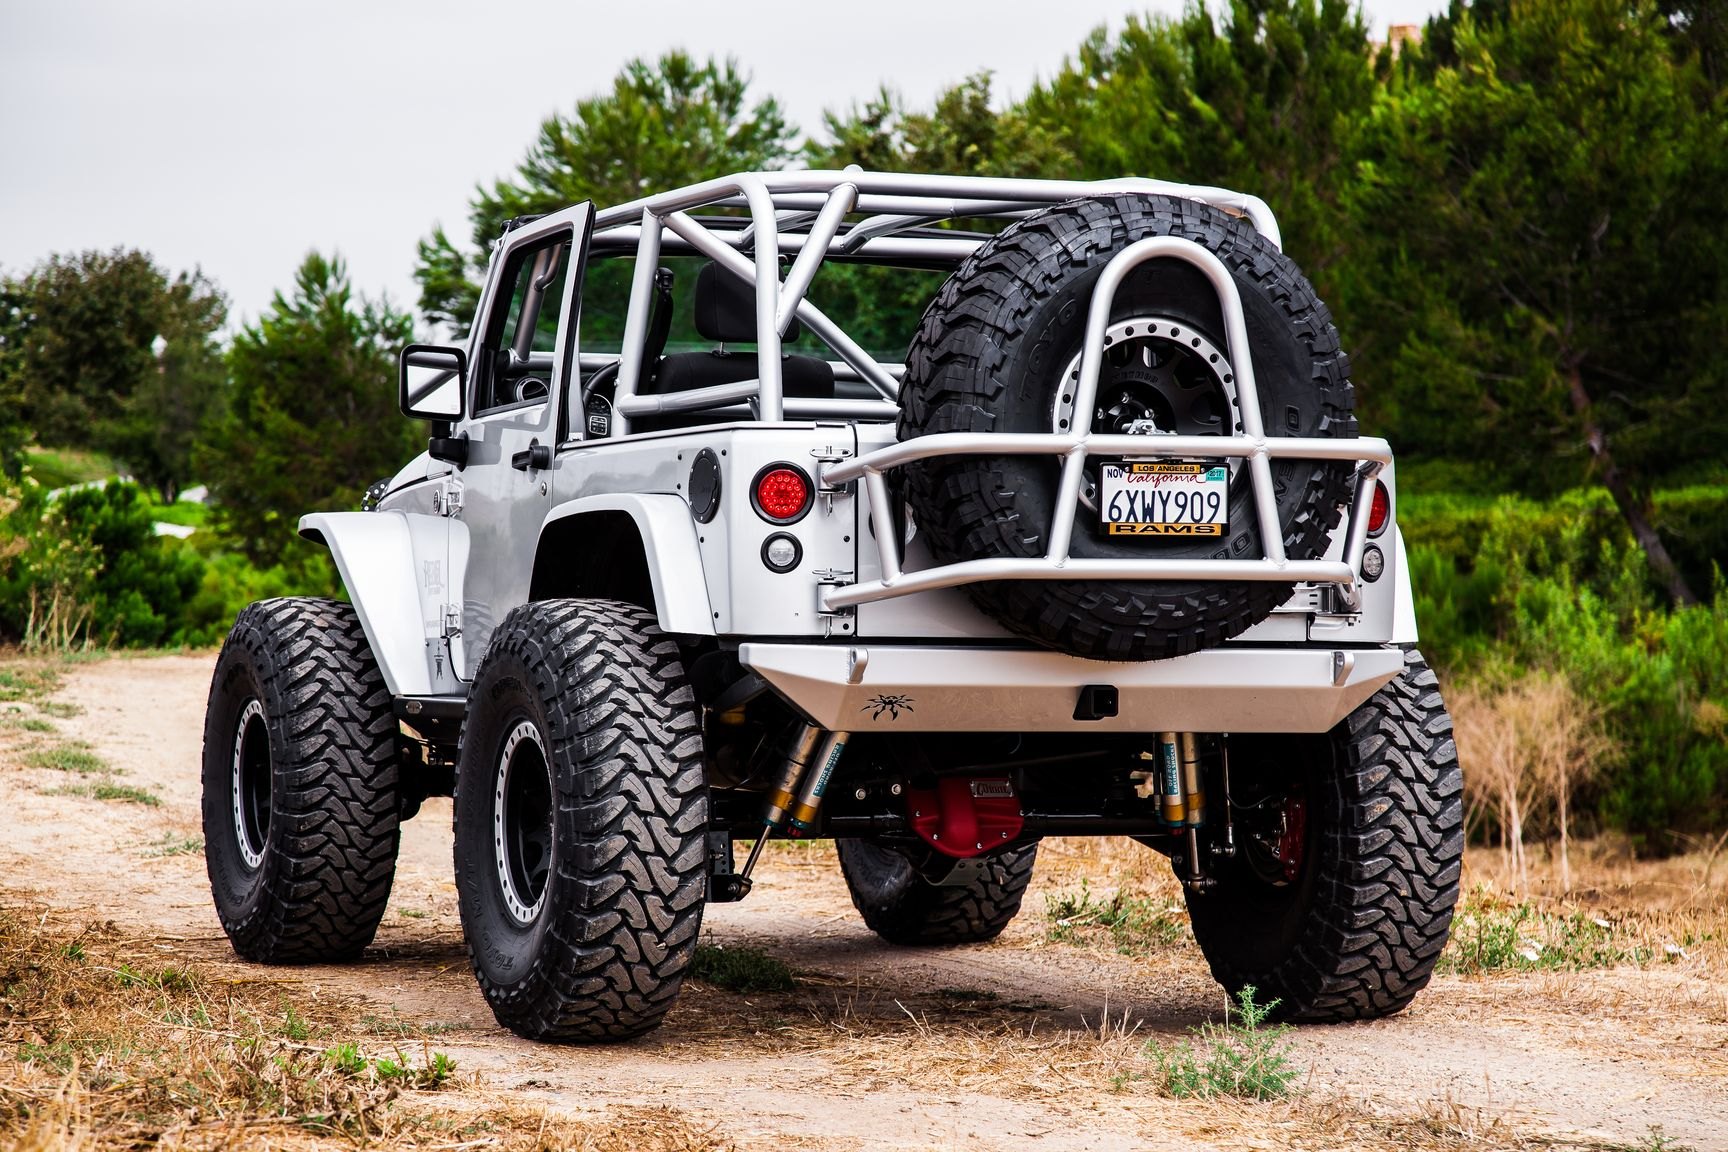 Toyo Spare Tire Kit on White Lifted Jeep Wrangler - Photo by Rebel Off-Road